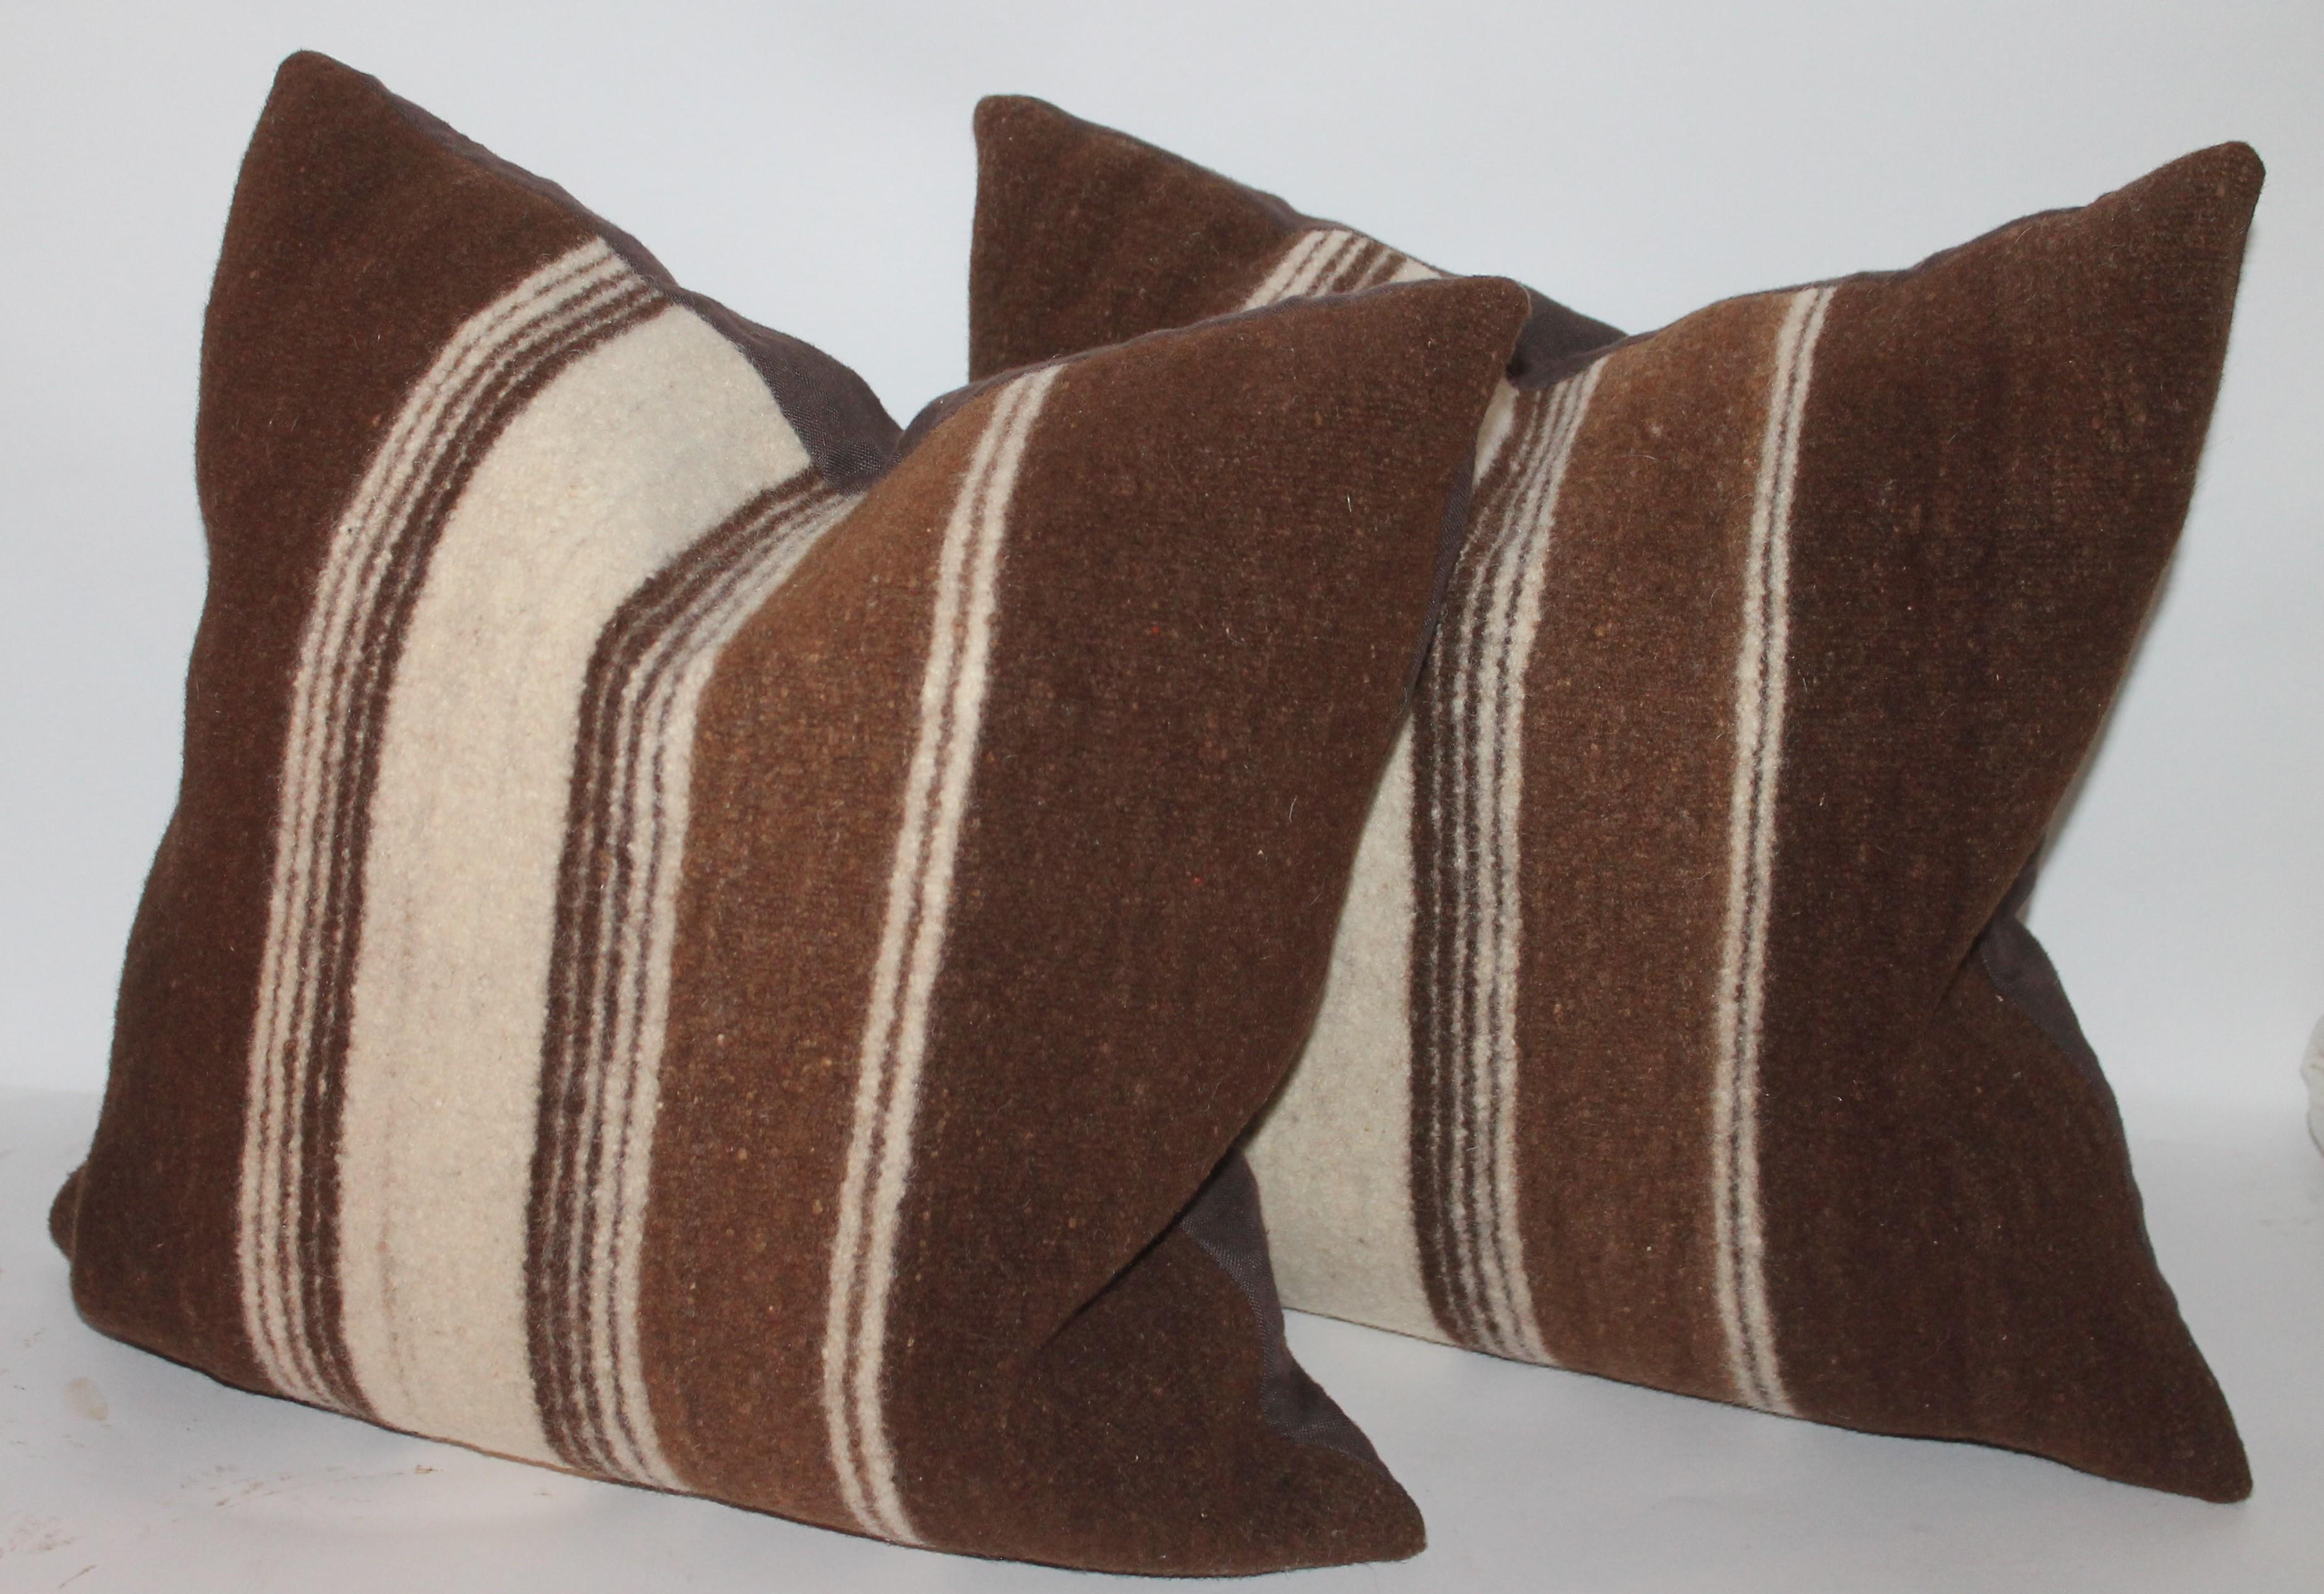 These hand made Alpaca woven pillows are in fantastic condition with cotton linen backings. Sold as a group or two pairs.